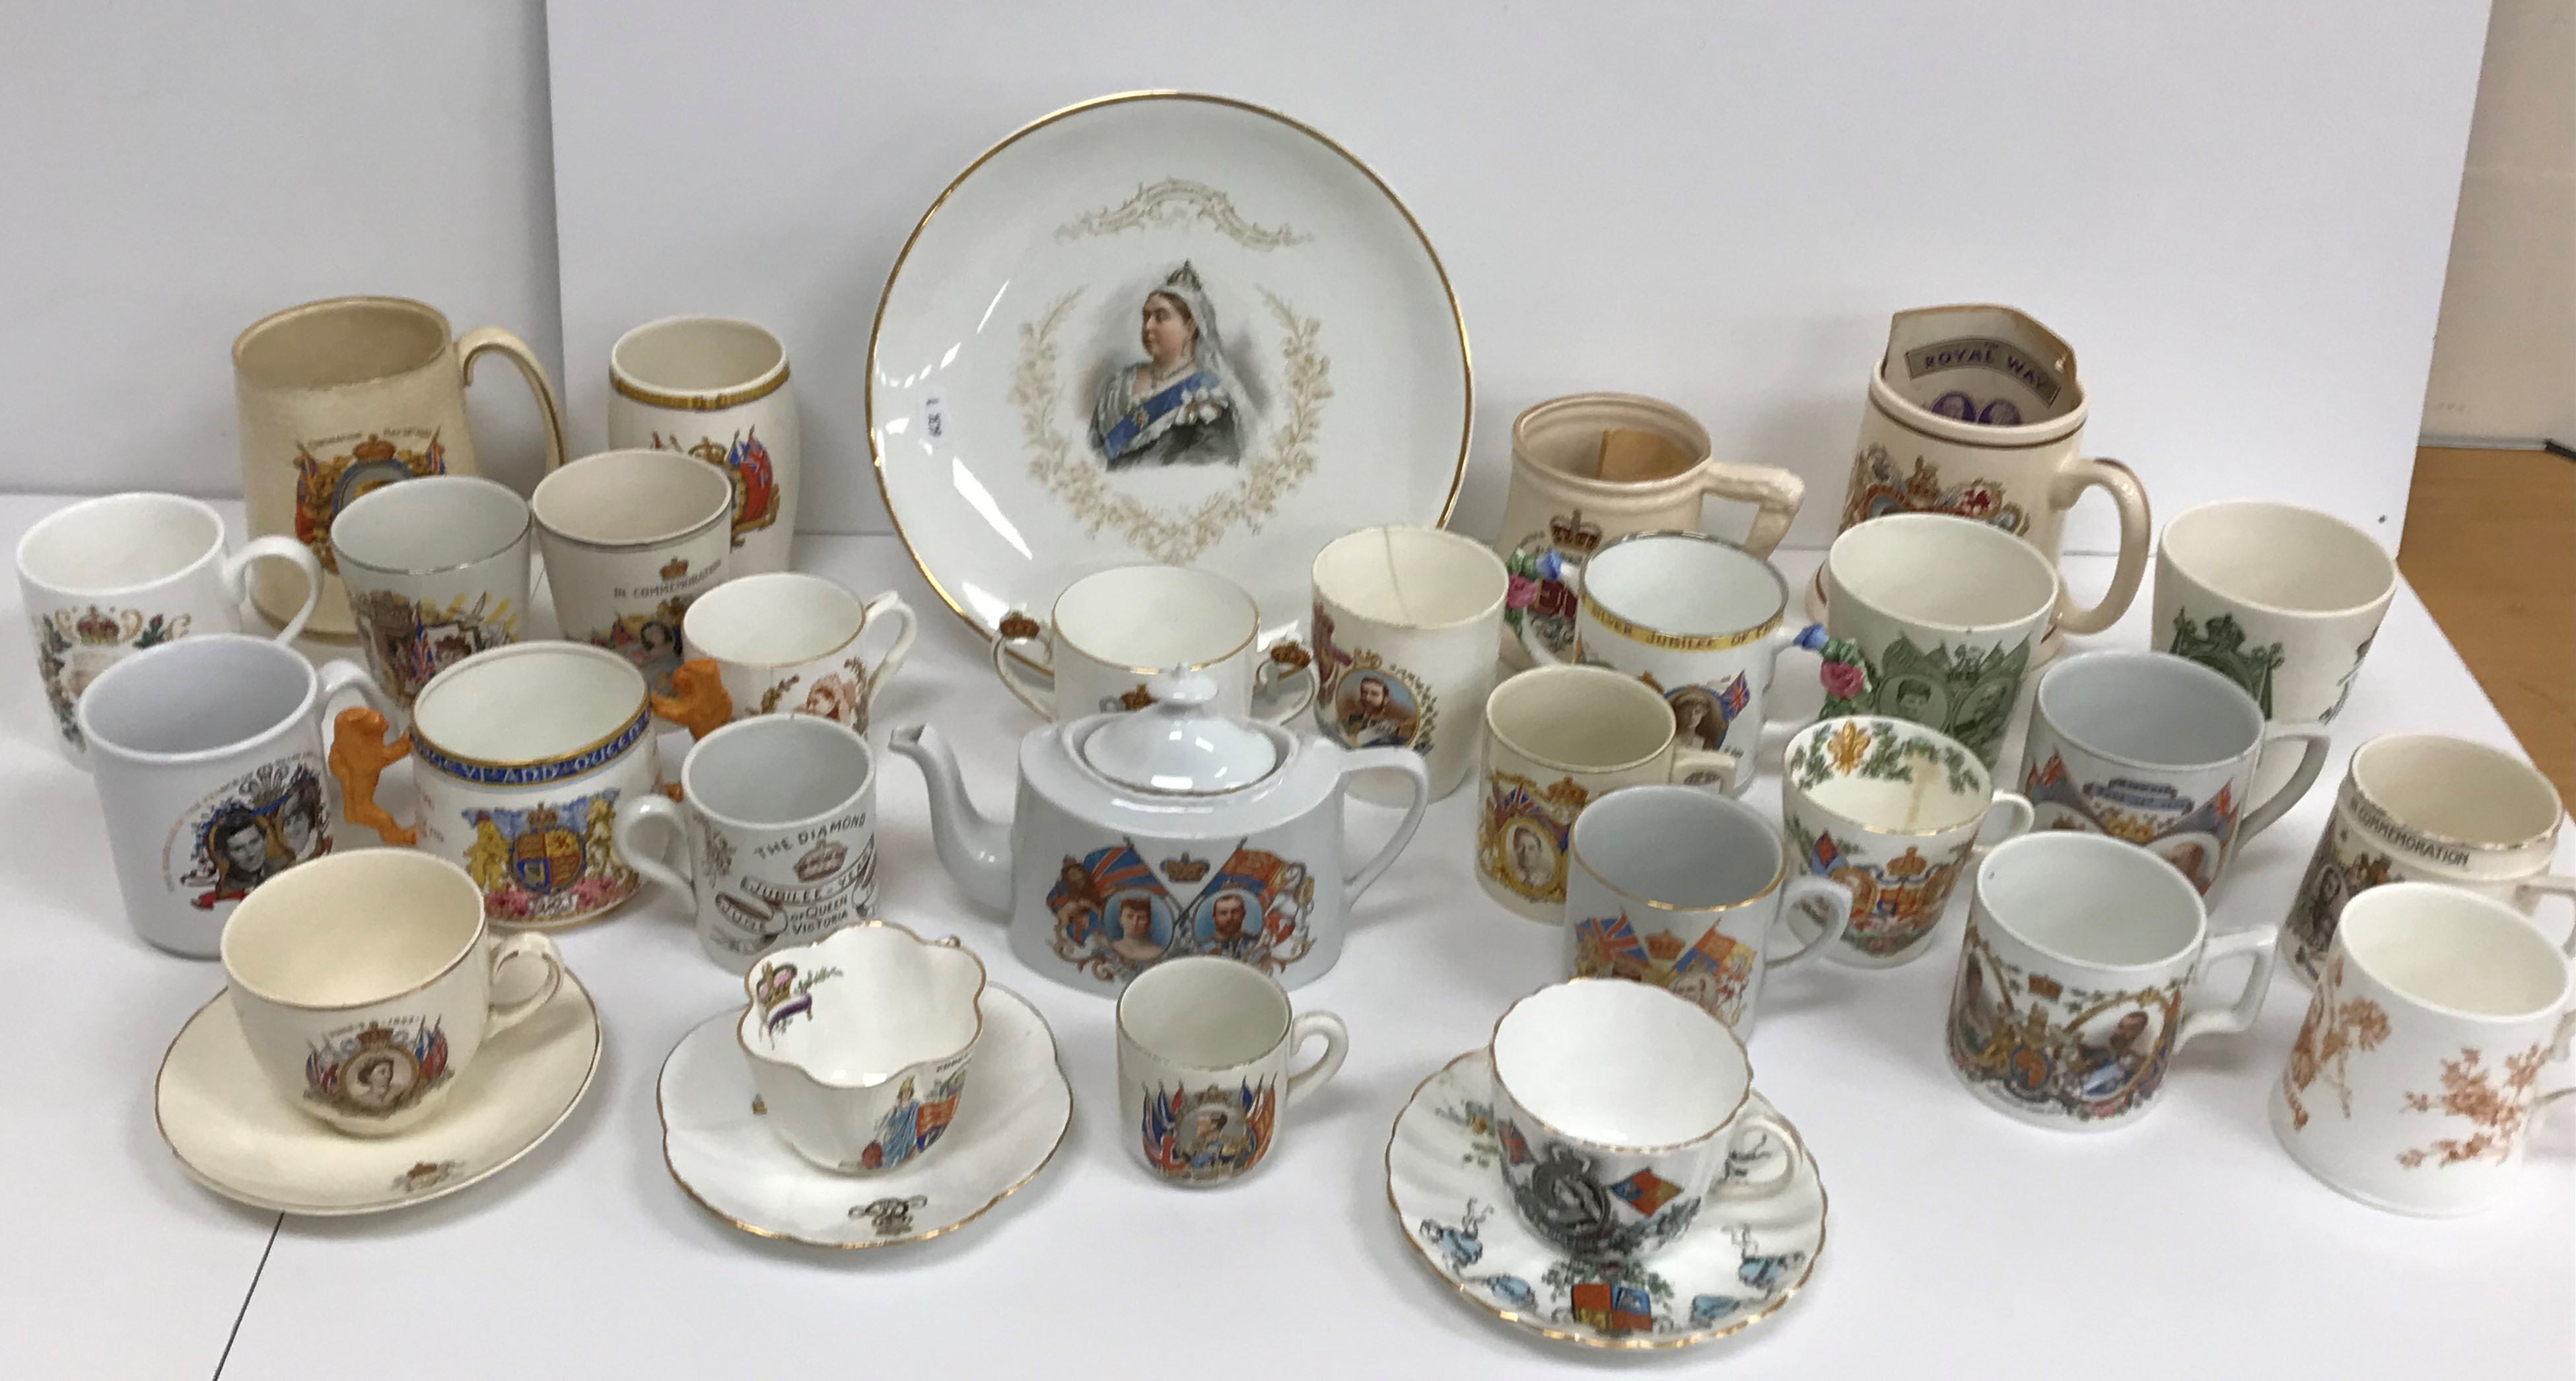 A collection of Royal Commemorative mugs, a teapot, plates, etc. - Image 2 of 2